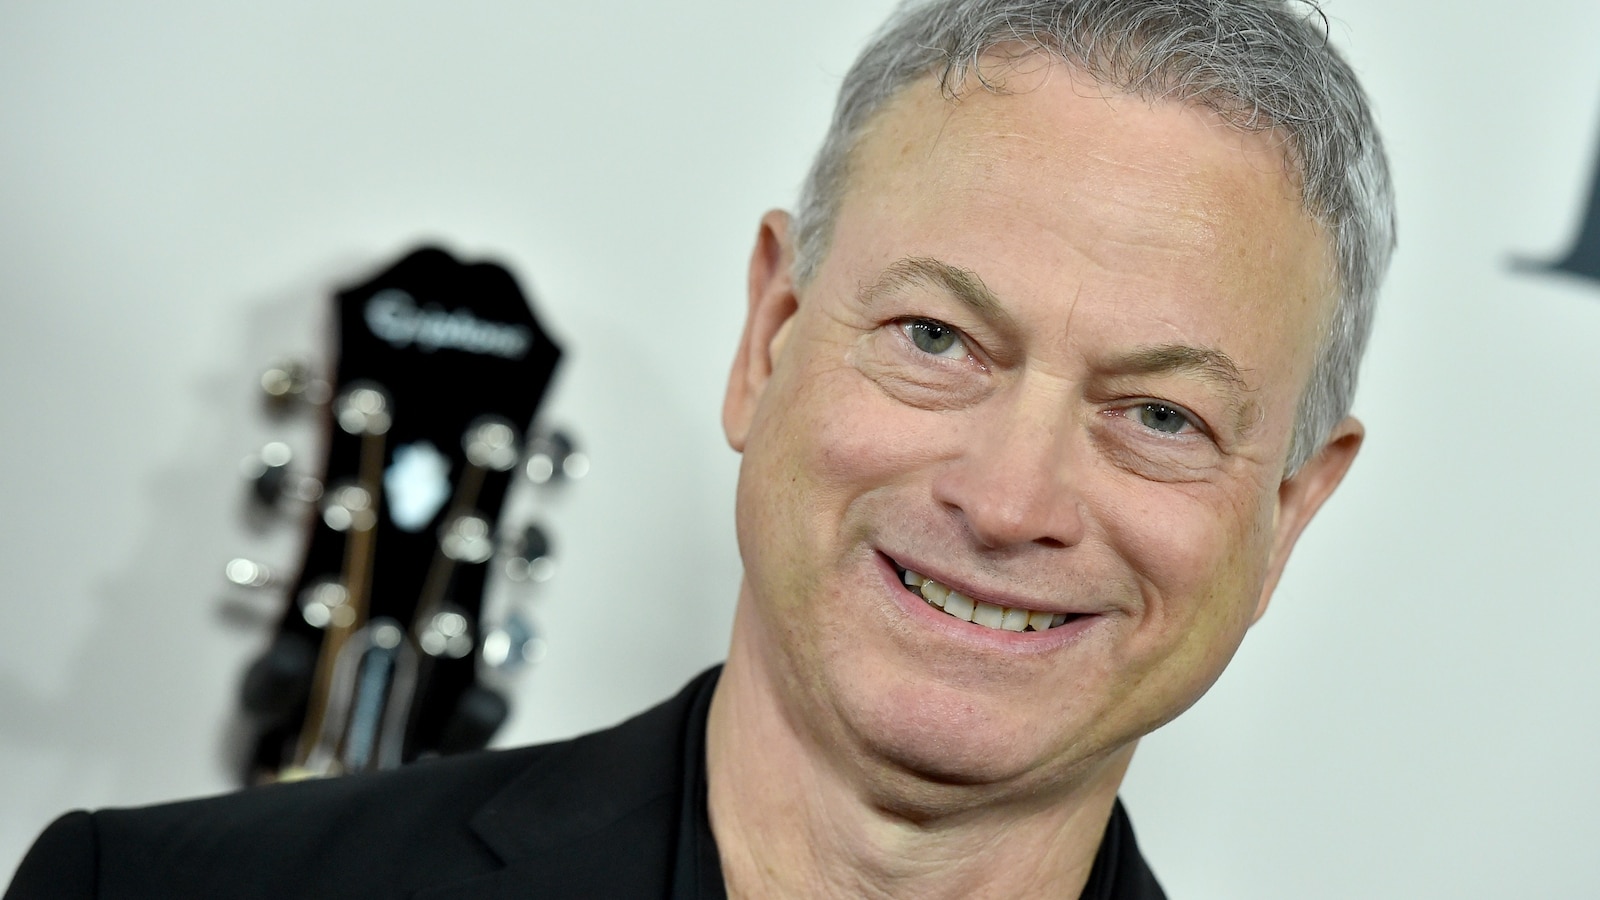 Gary Sinise Honors Late Son Mac, Who Passed Away from Cancer at 33